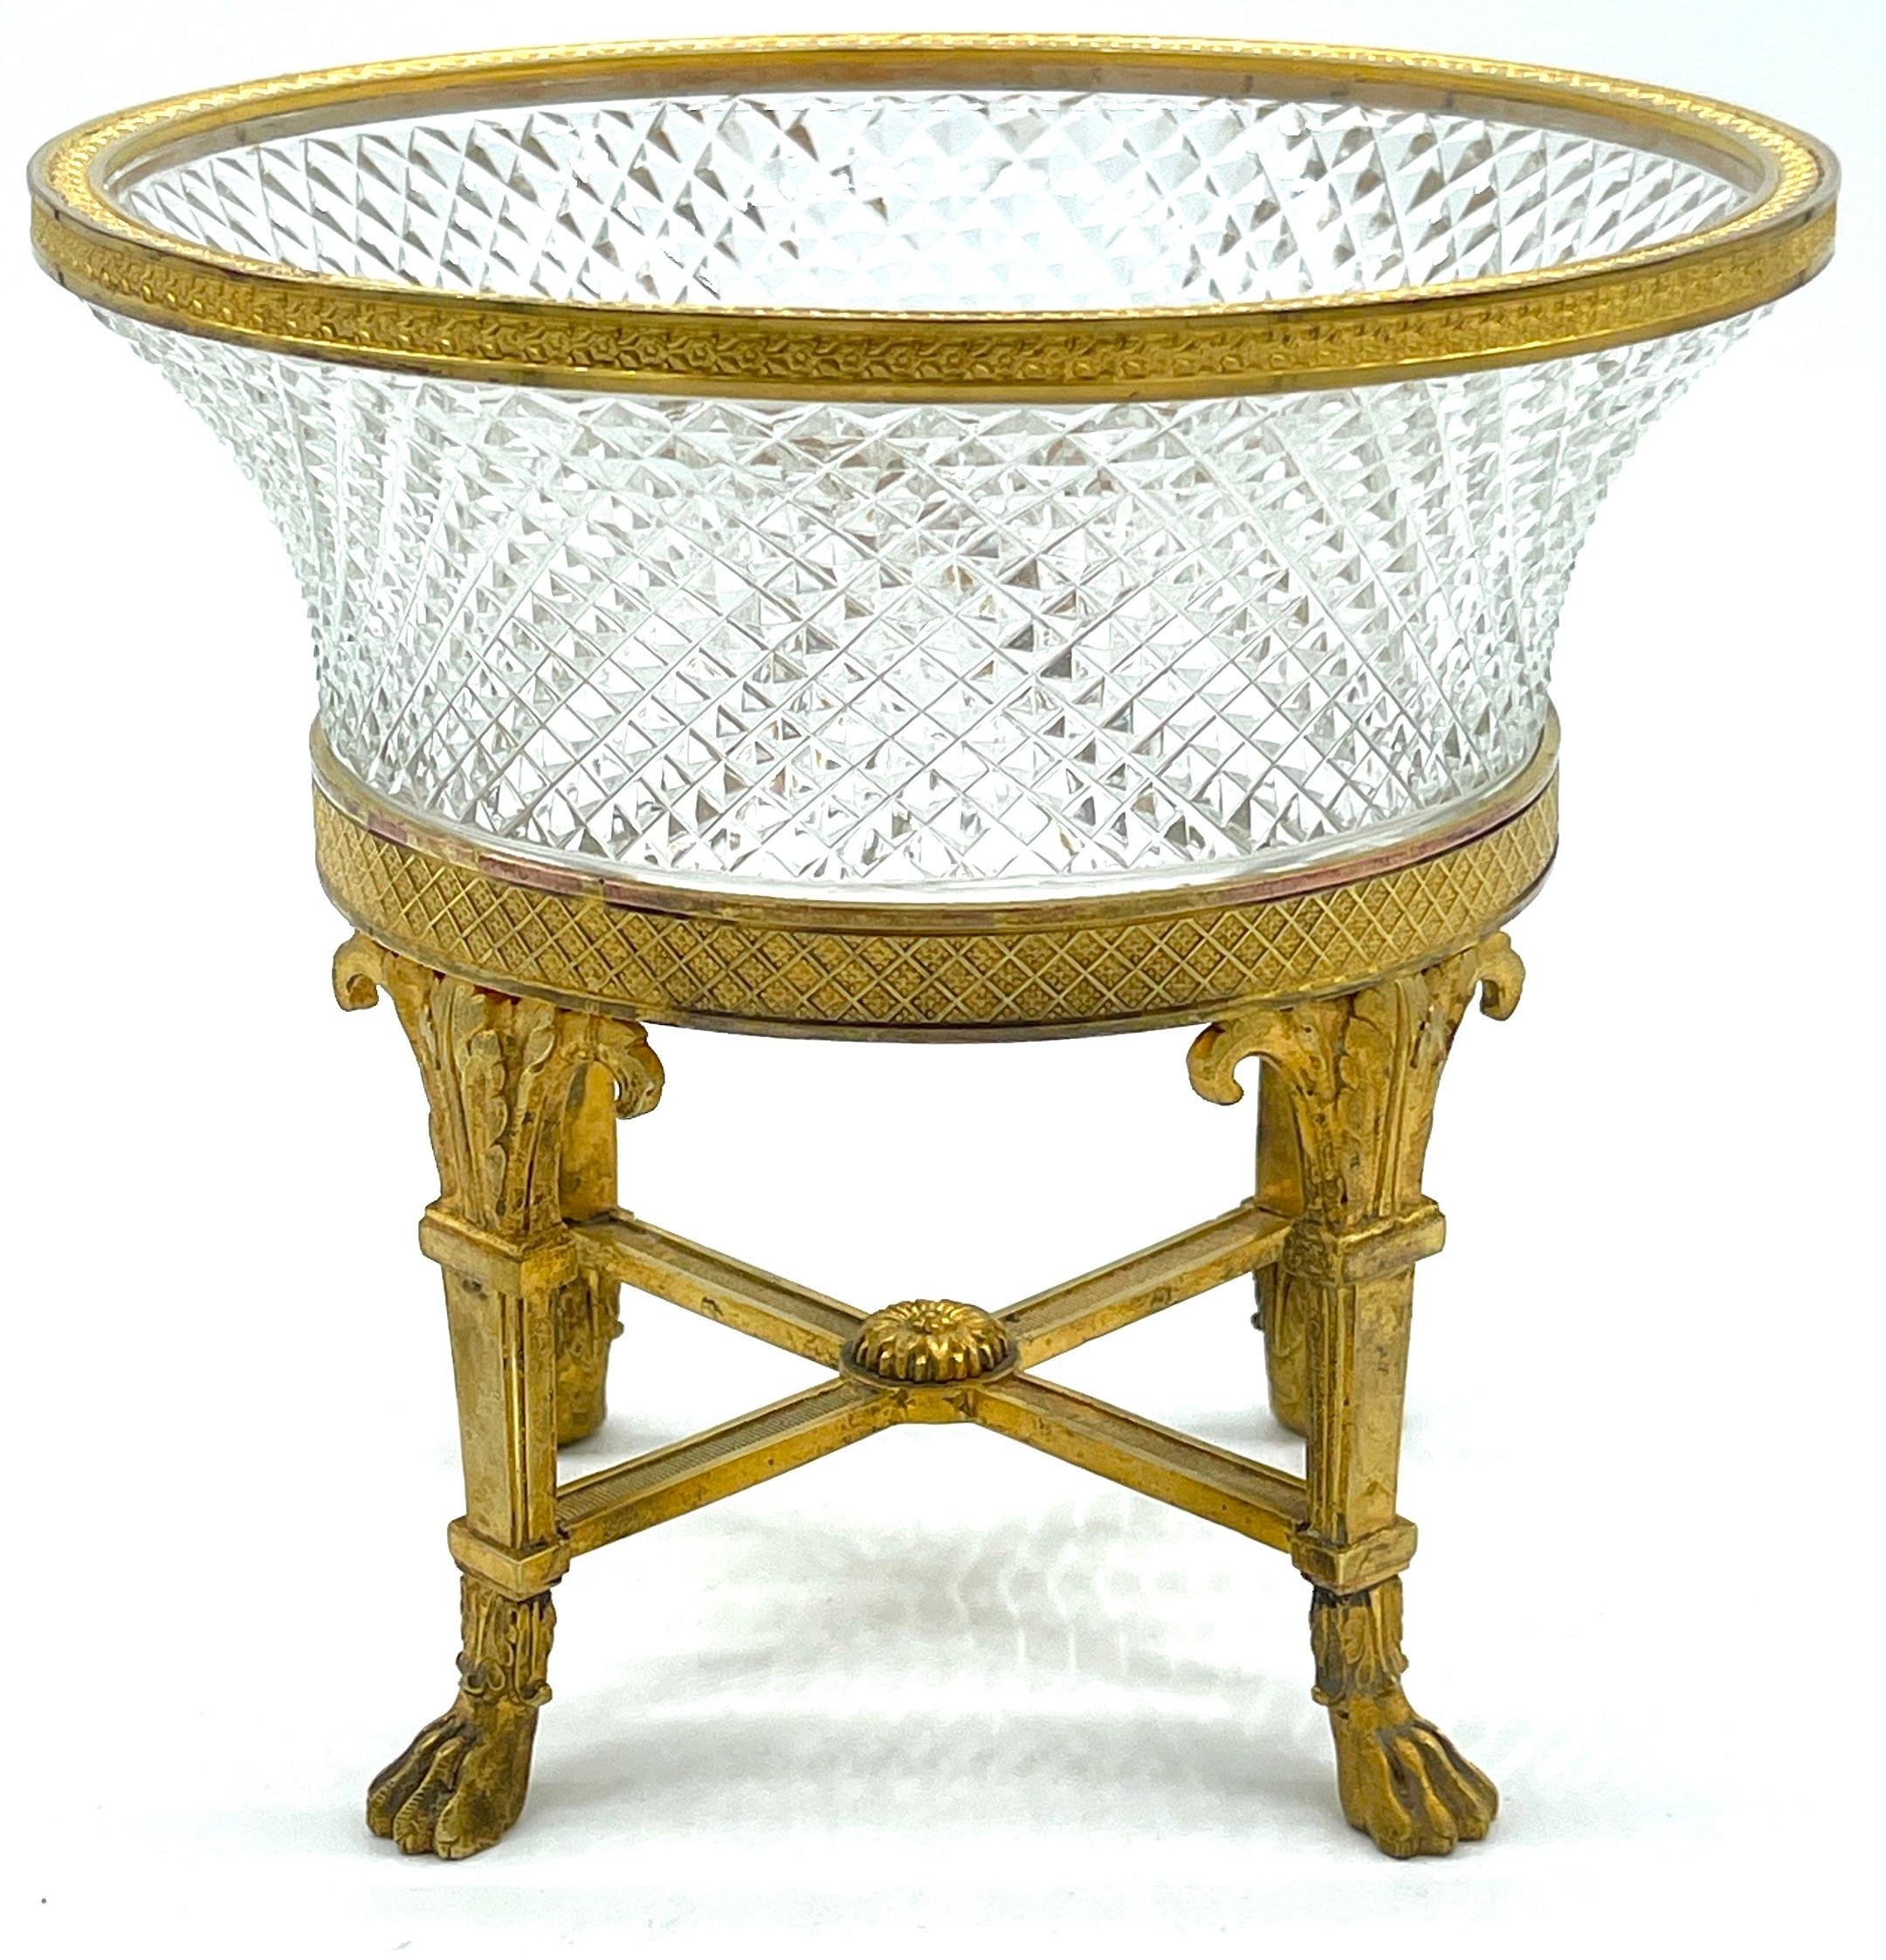 Empire Style Ormolu and Cut Crystal Compote/Tazza 
Made in Austria, circa 1920s
An elegant Empire Style Ormolu and Cut Crystal Compote/Tazza made in Austria during the 1920s, presenting a fine example of French Empire style with a subtle nod to